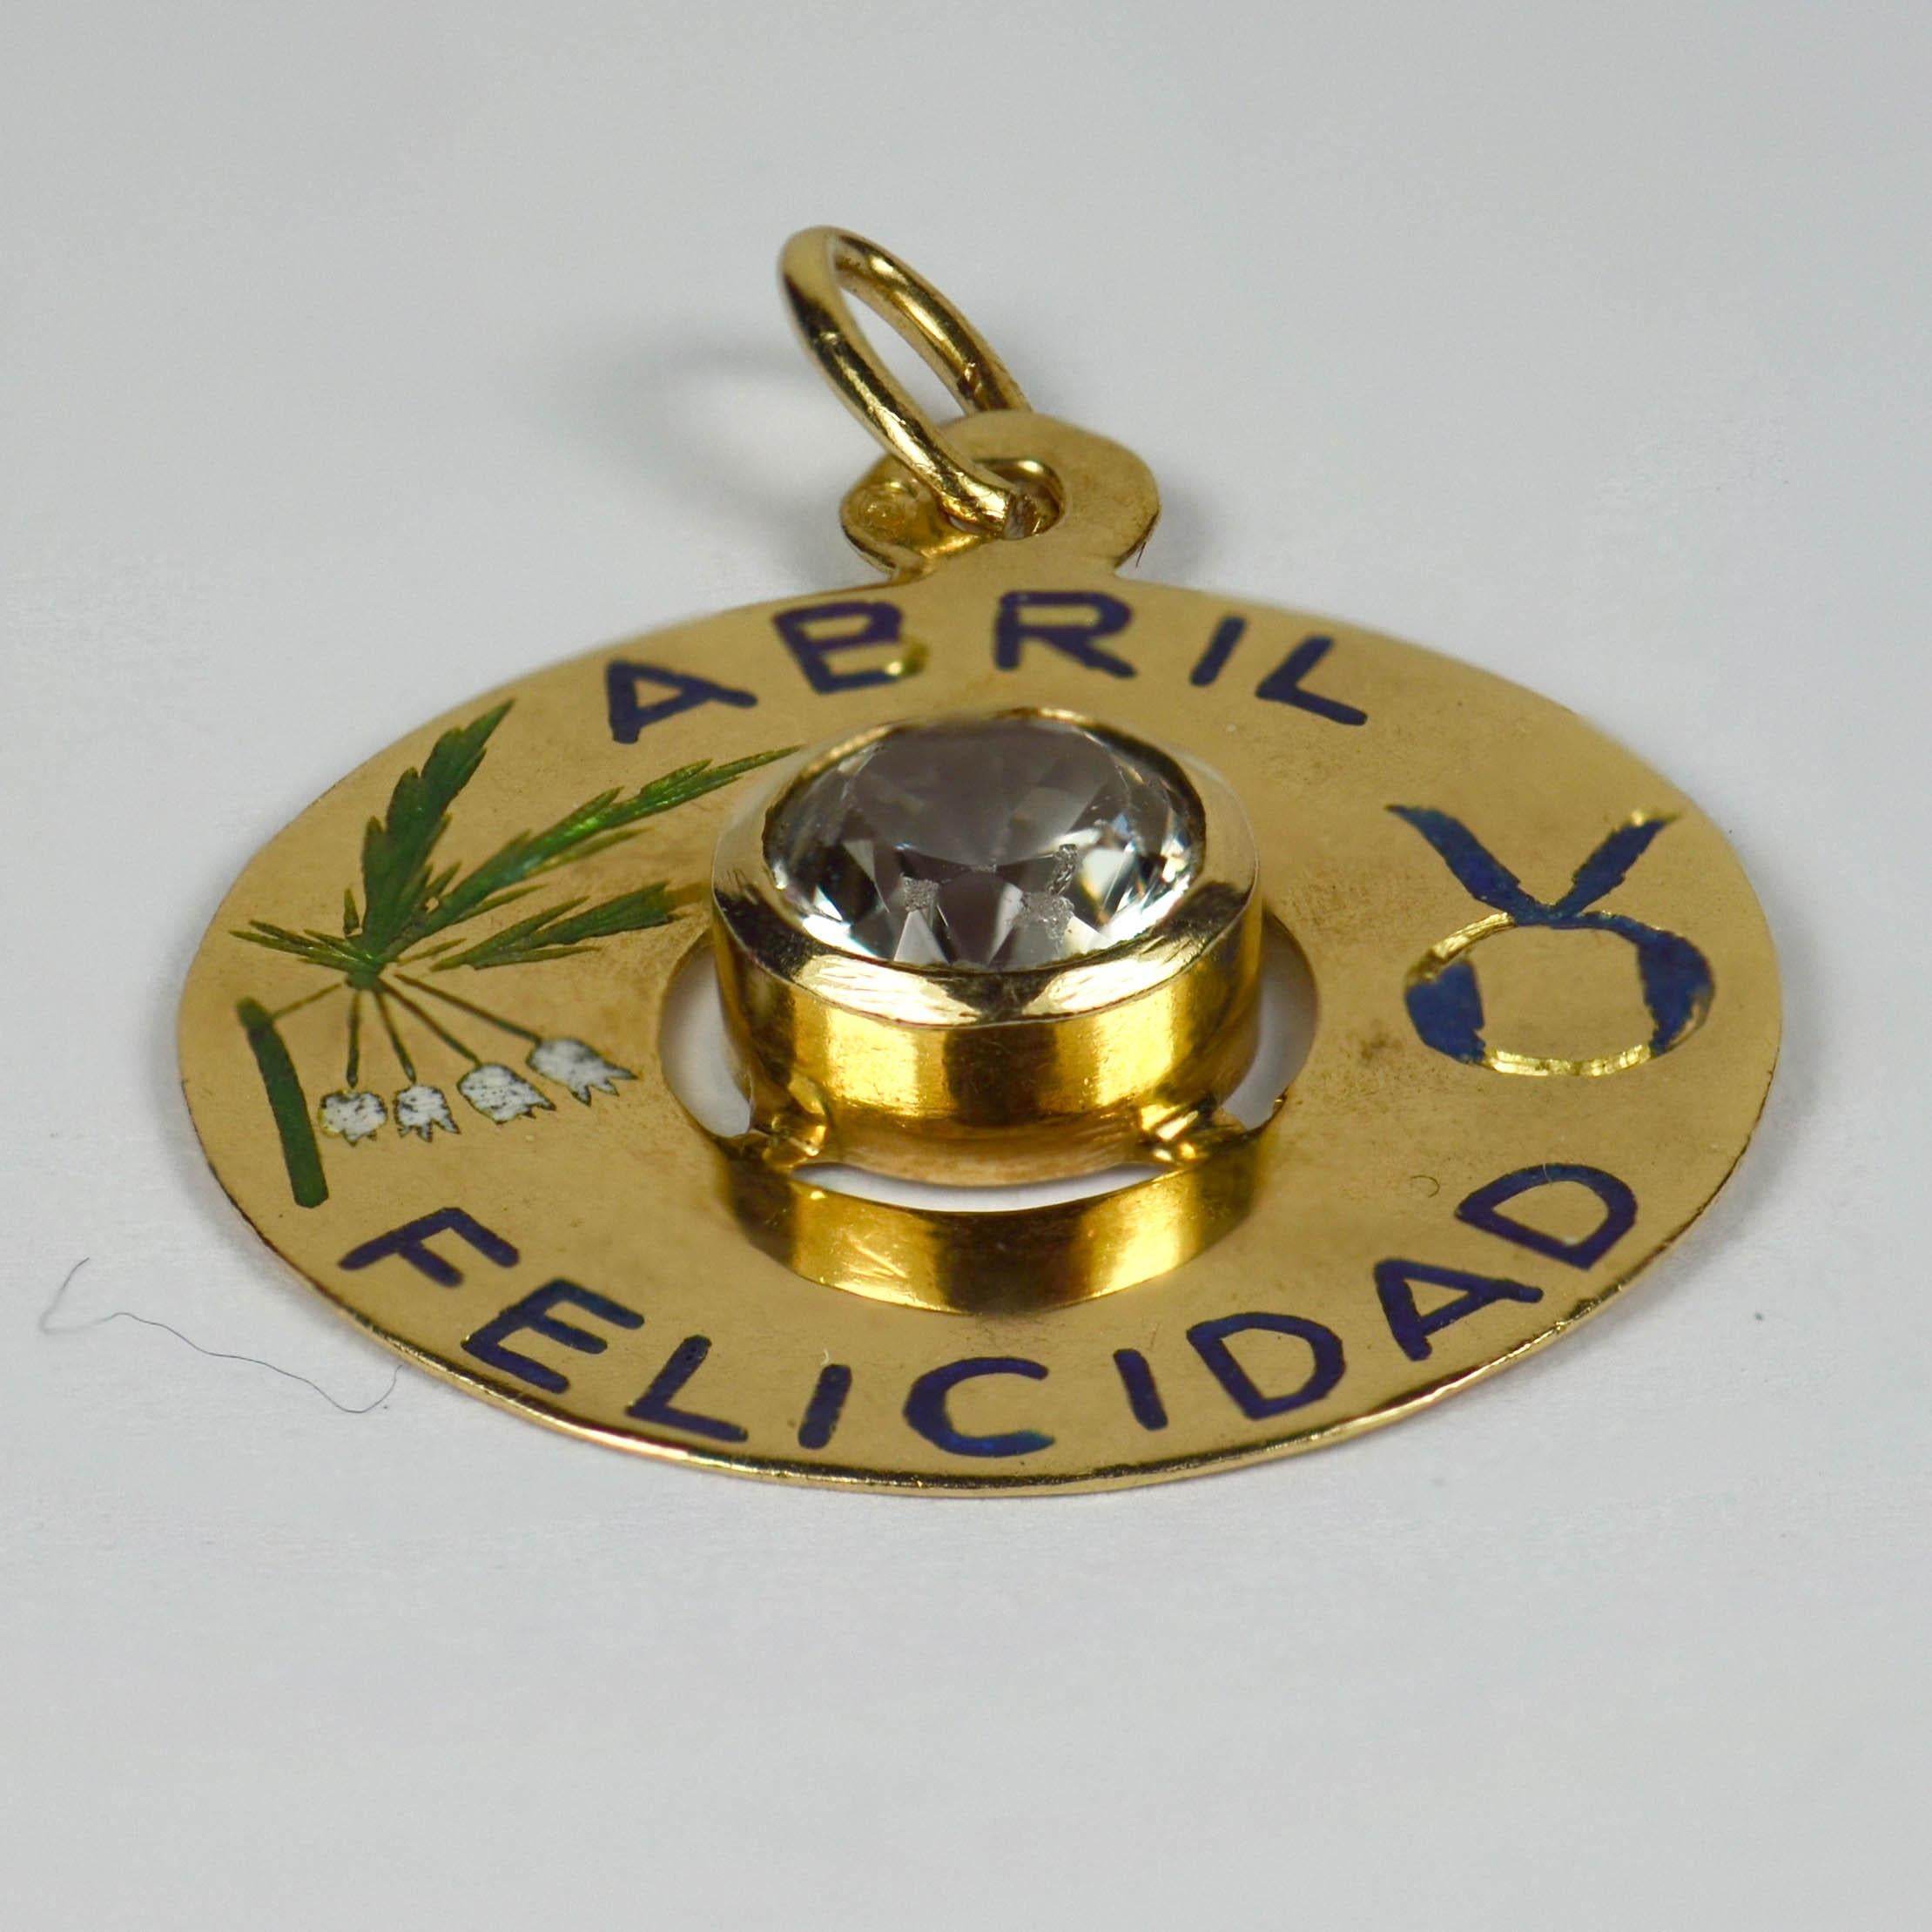 An 18 karat yellow gold charm pendant designed as a gold disc with enamel inlay of 'ABRIL FELICIDAD' (April Happiness) with the zodiac symbol for Taurus and lily of the valley (meaning happiness or joy) in enamel, and set to the centre with a